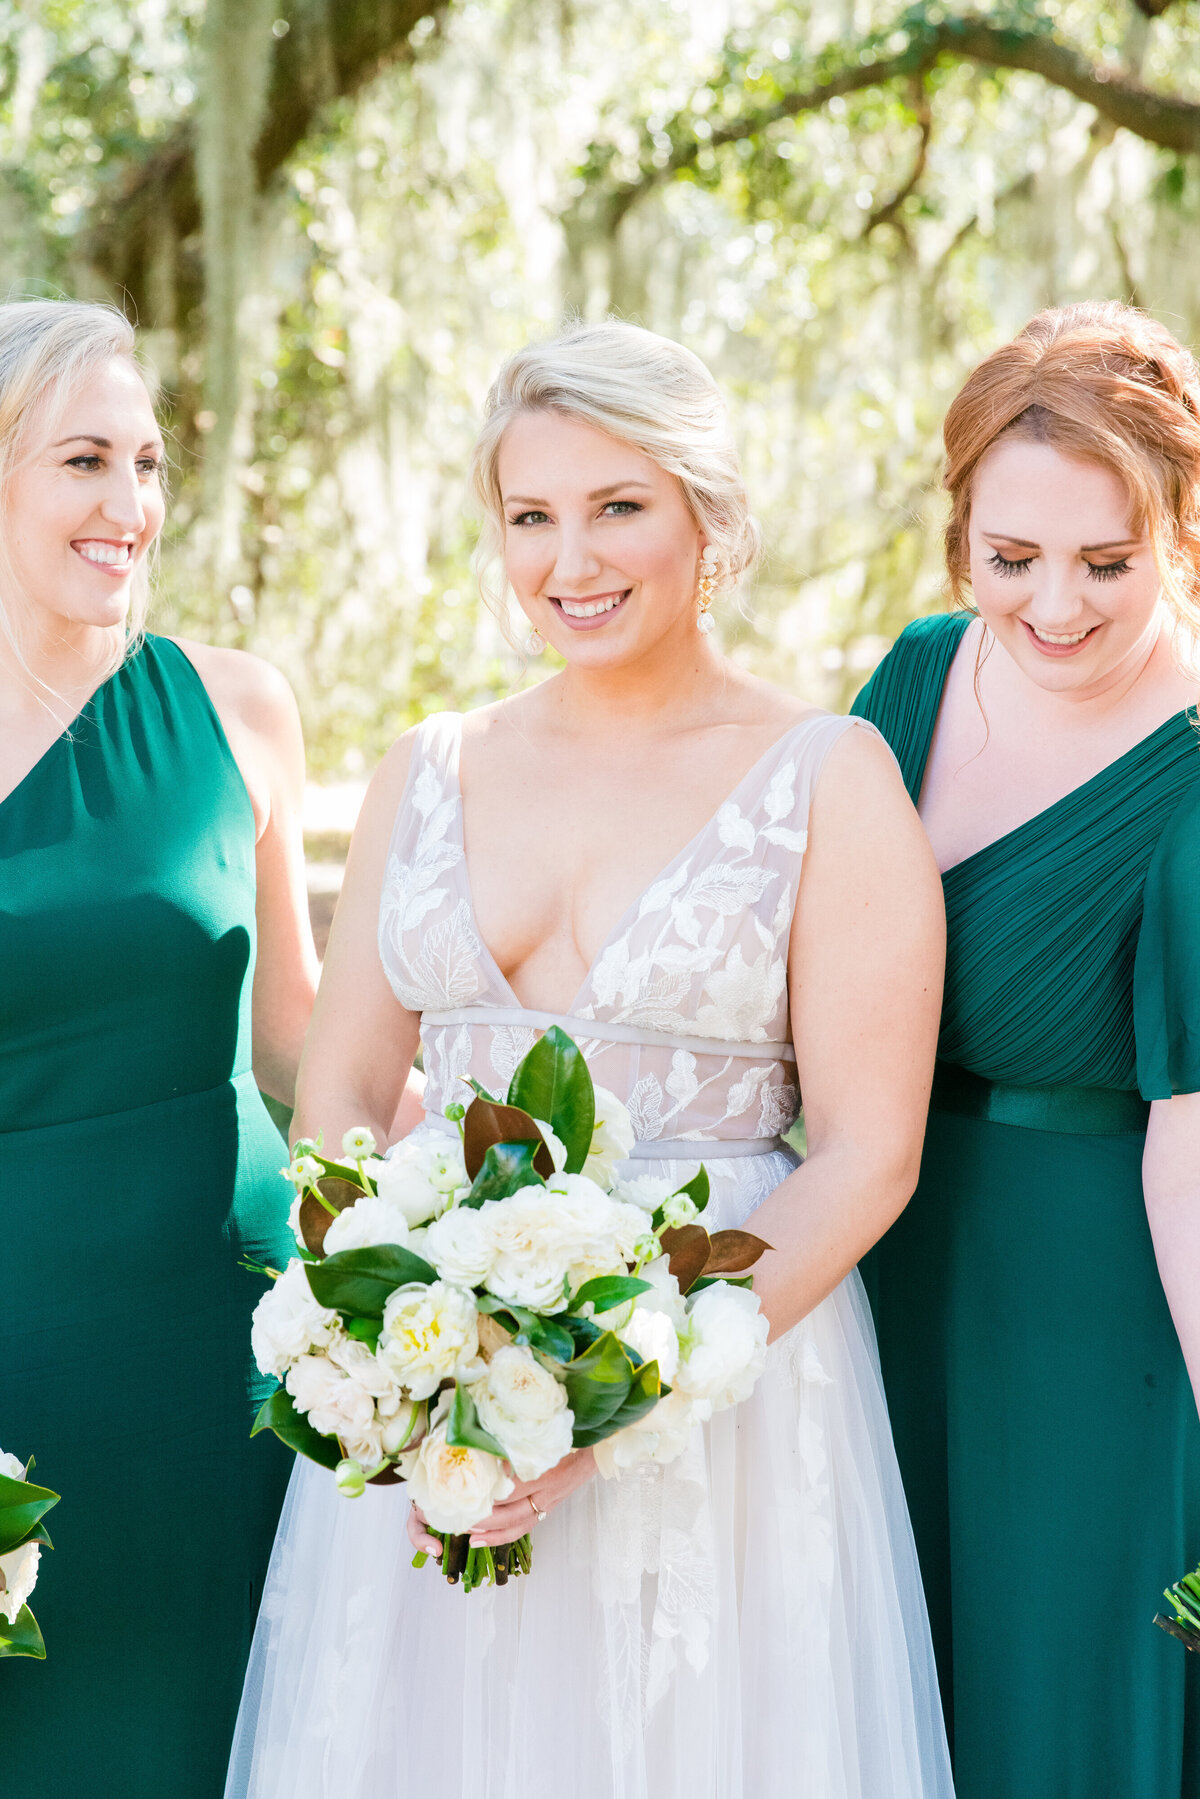 Bride with bridesmaids before her Veuve-inspired wedding at Palmetto Bluff in Charleston, SC. Photographed by Charleston Wedding Photographer Dana Cubbage.